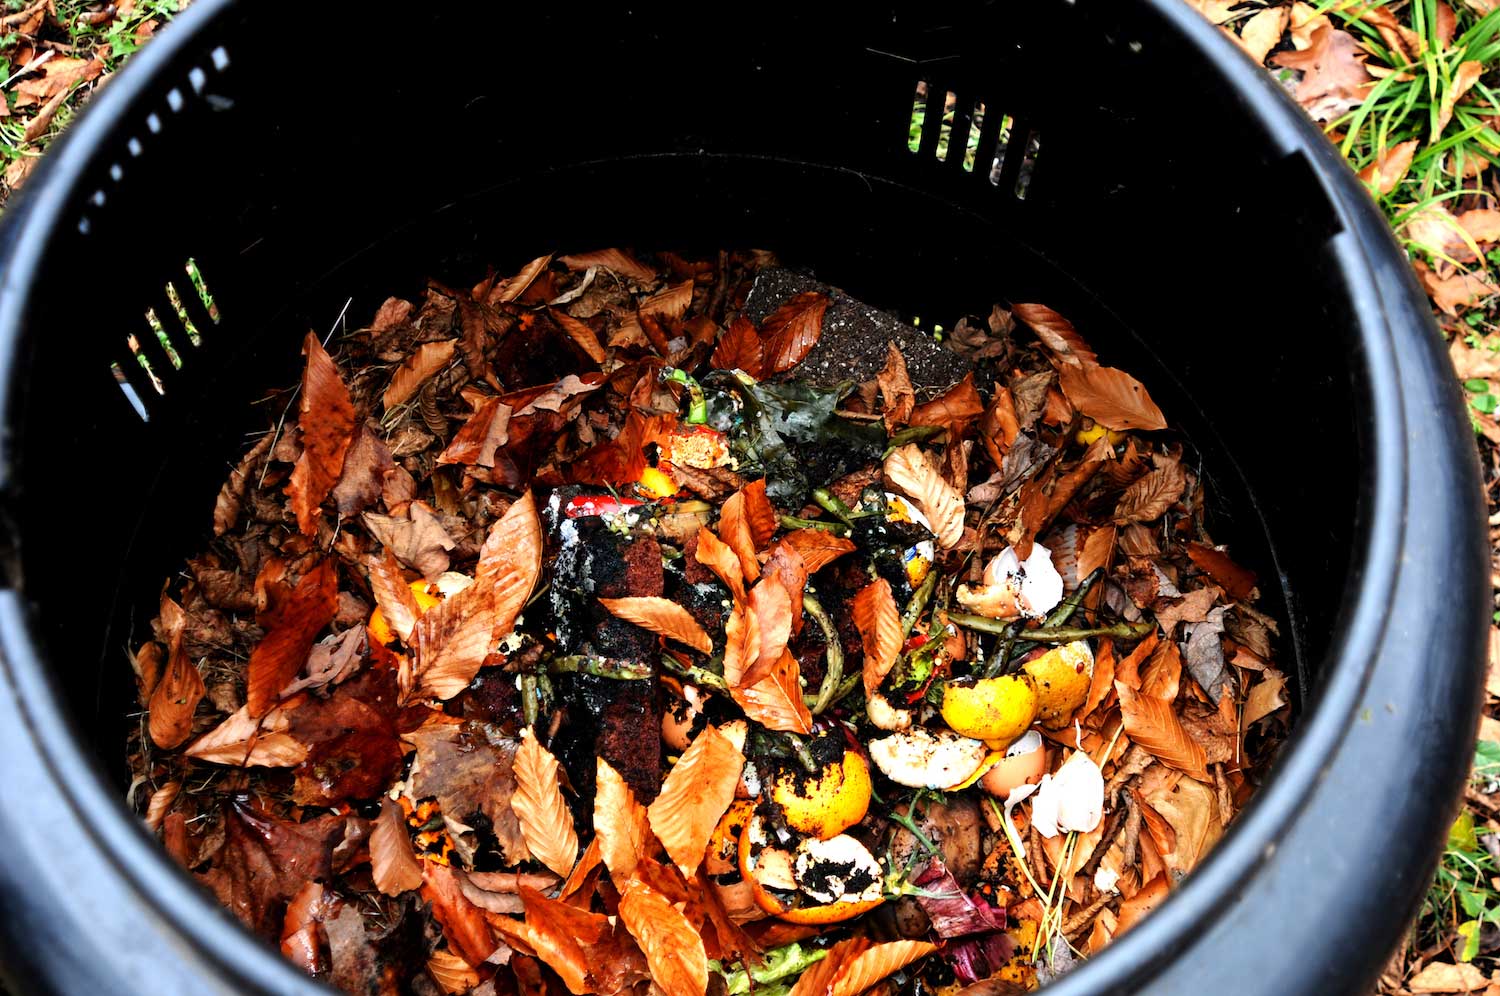 Food scraps and compost in a compost bin.